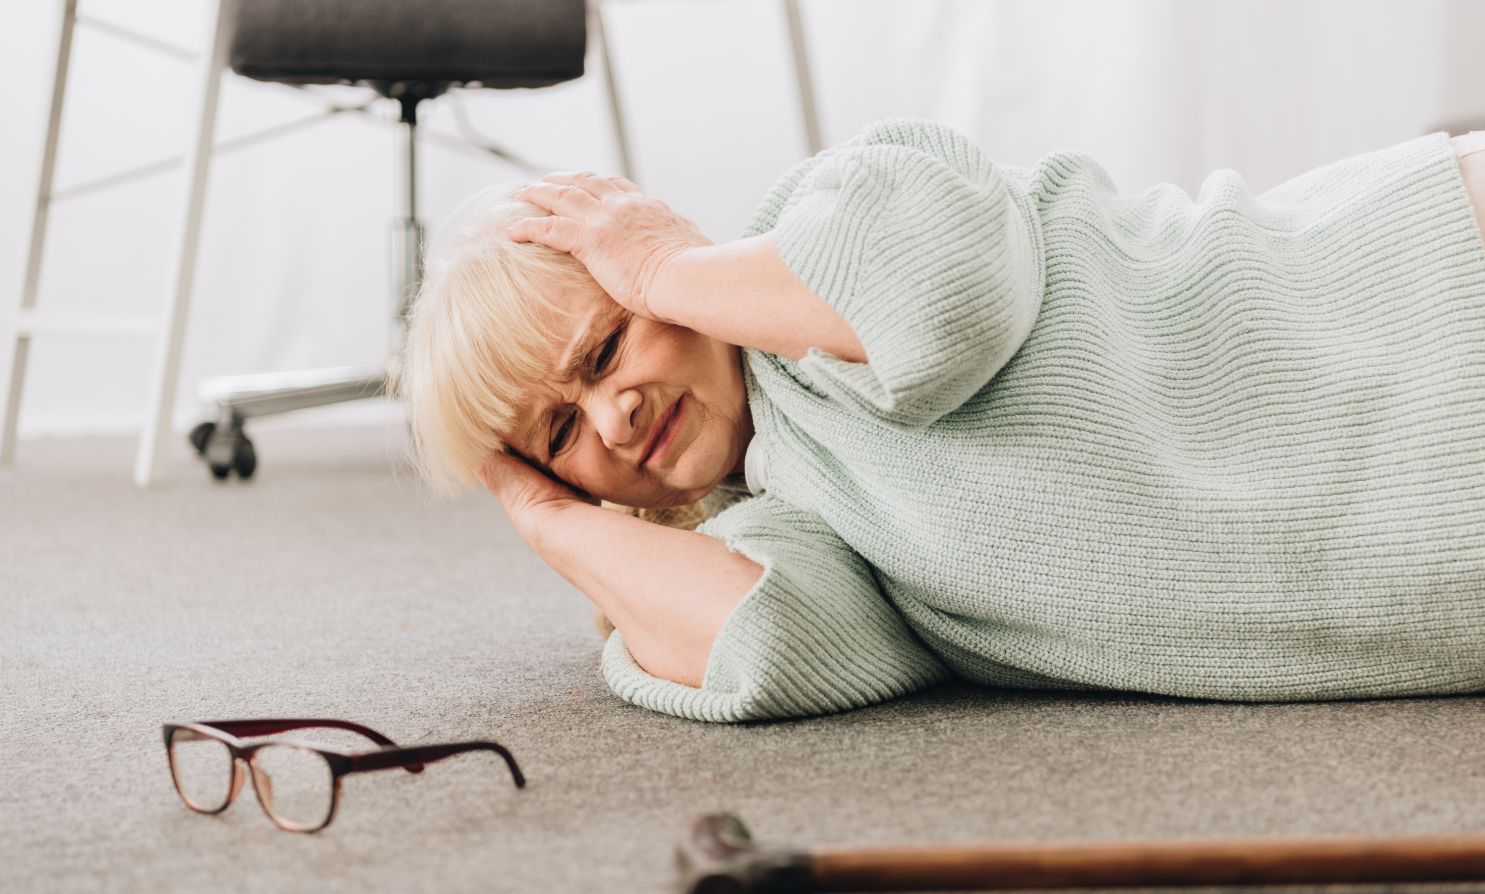 Why women over 50 fall - why women over 50 are prone to falls